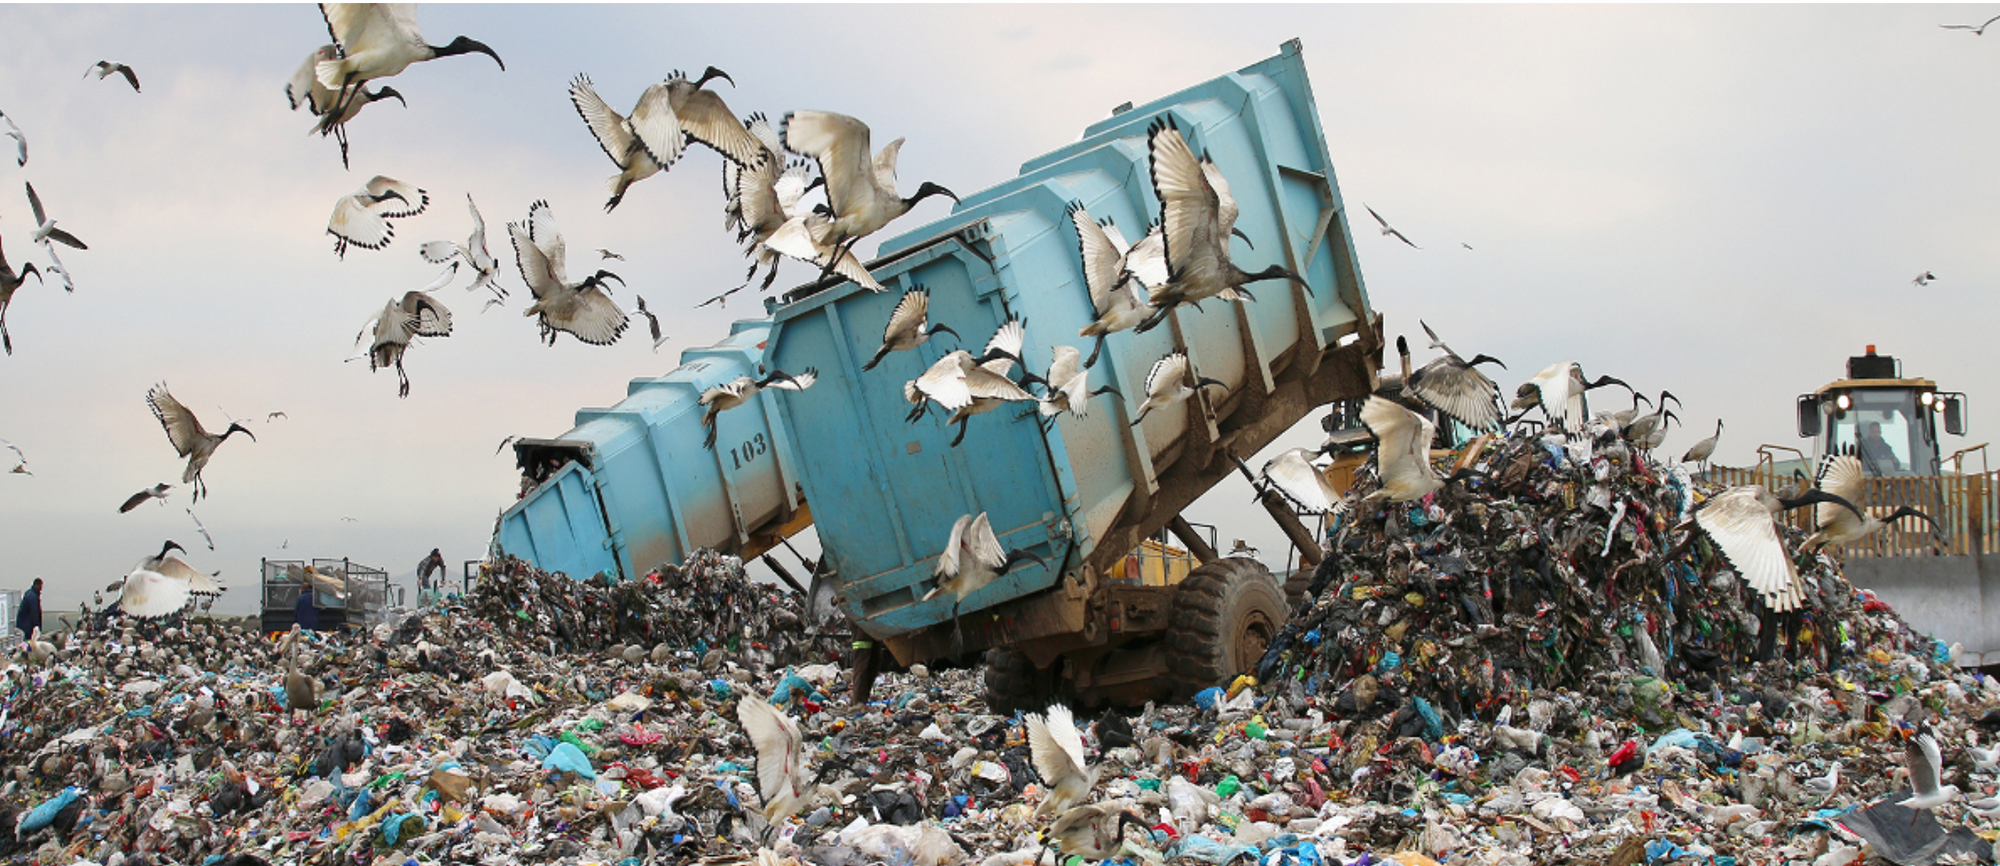 Birds fly away as huge truckload of garbage is emptied into Cape Town landfill site